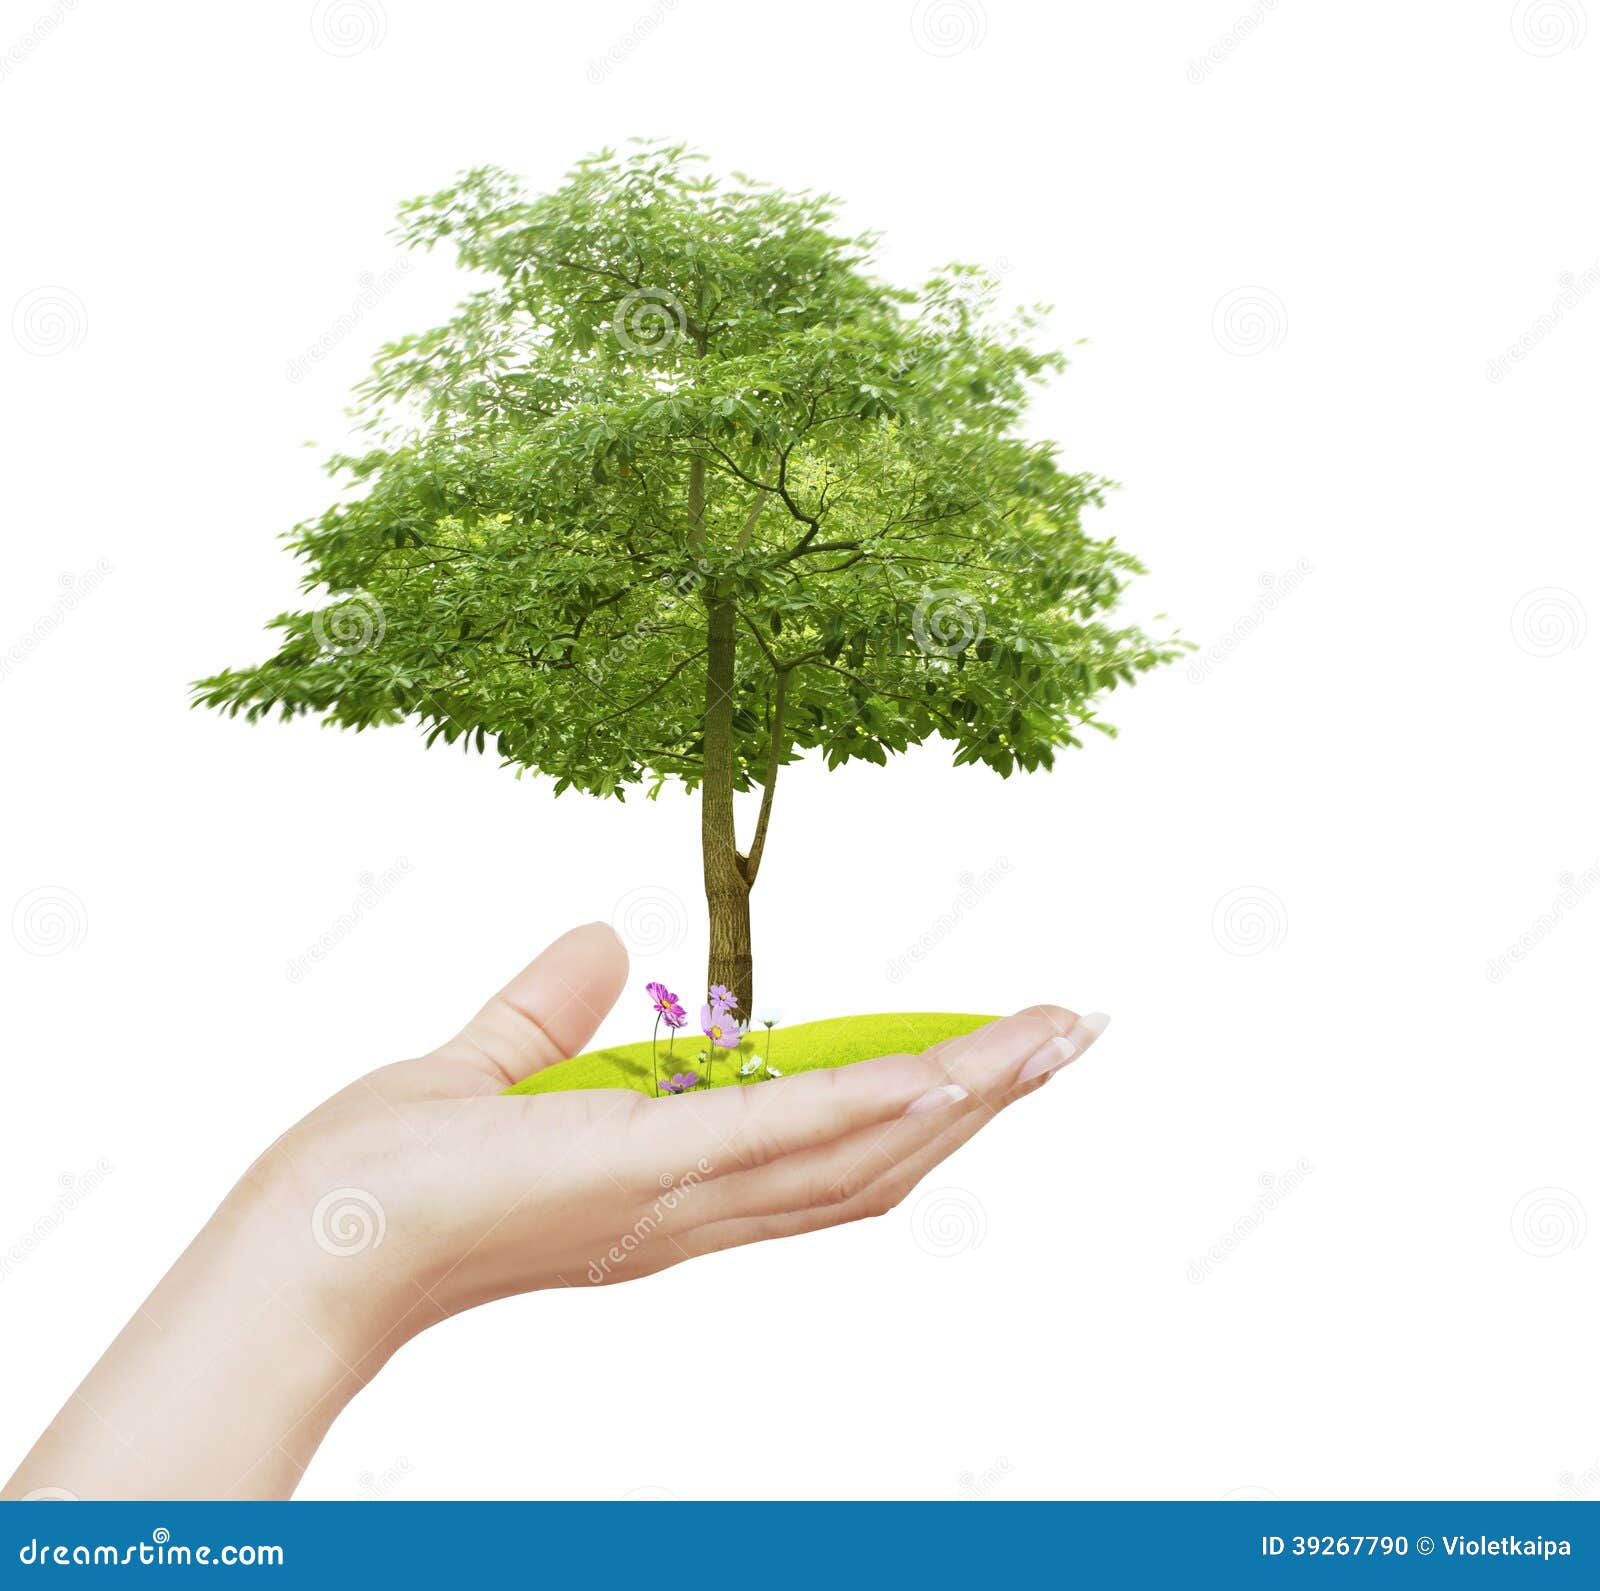 small tree, plant in hand stock photo. image of leaf - 39267790